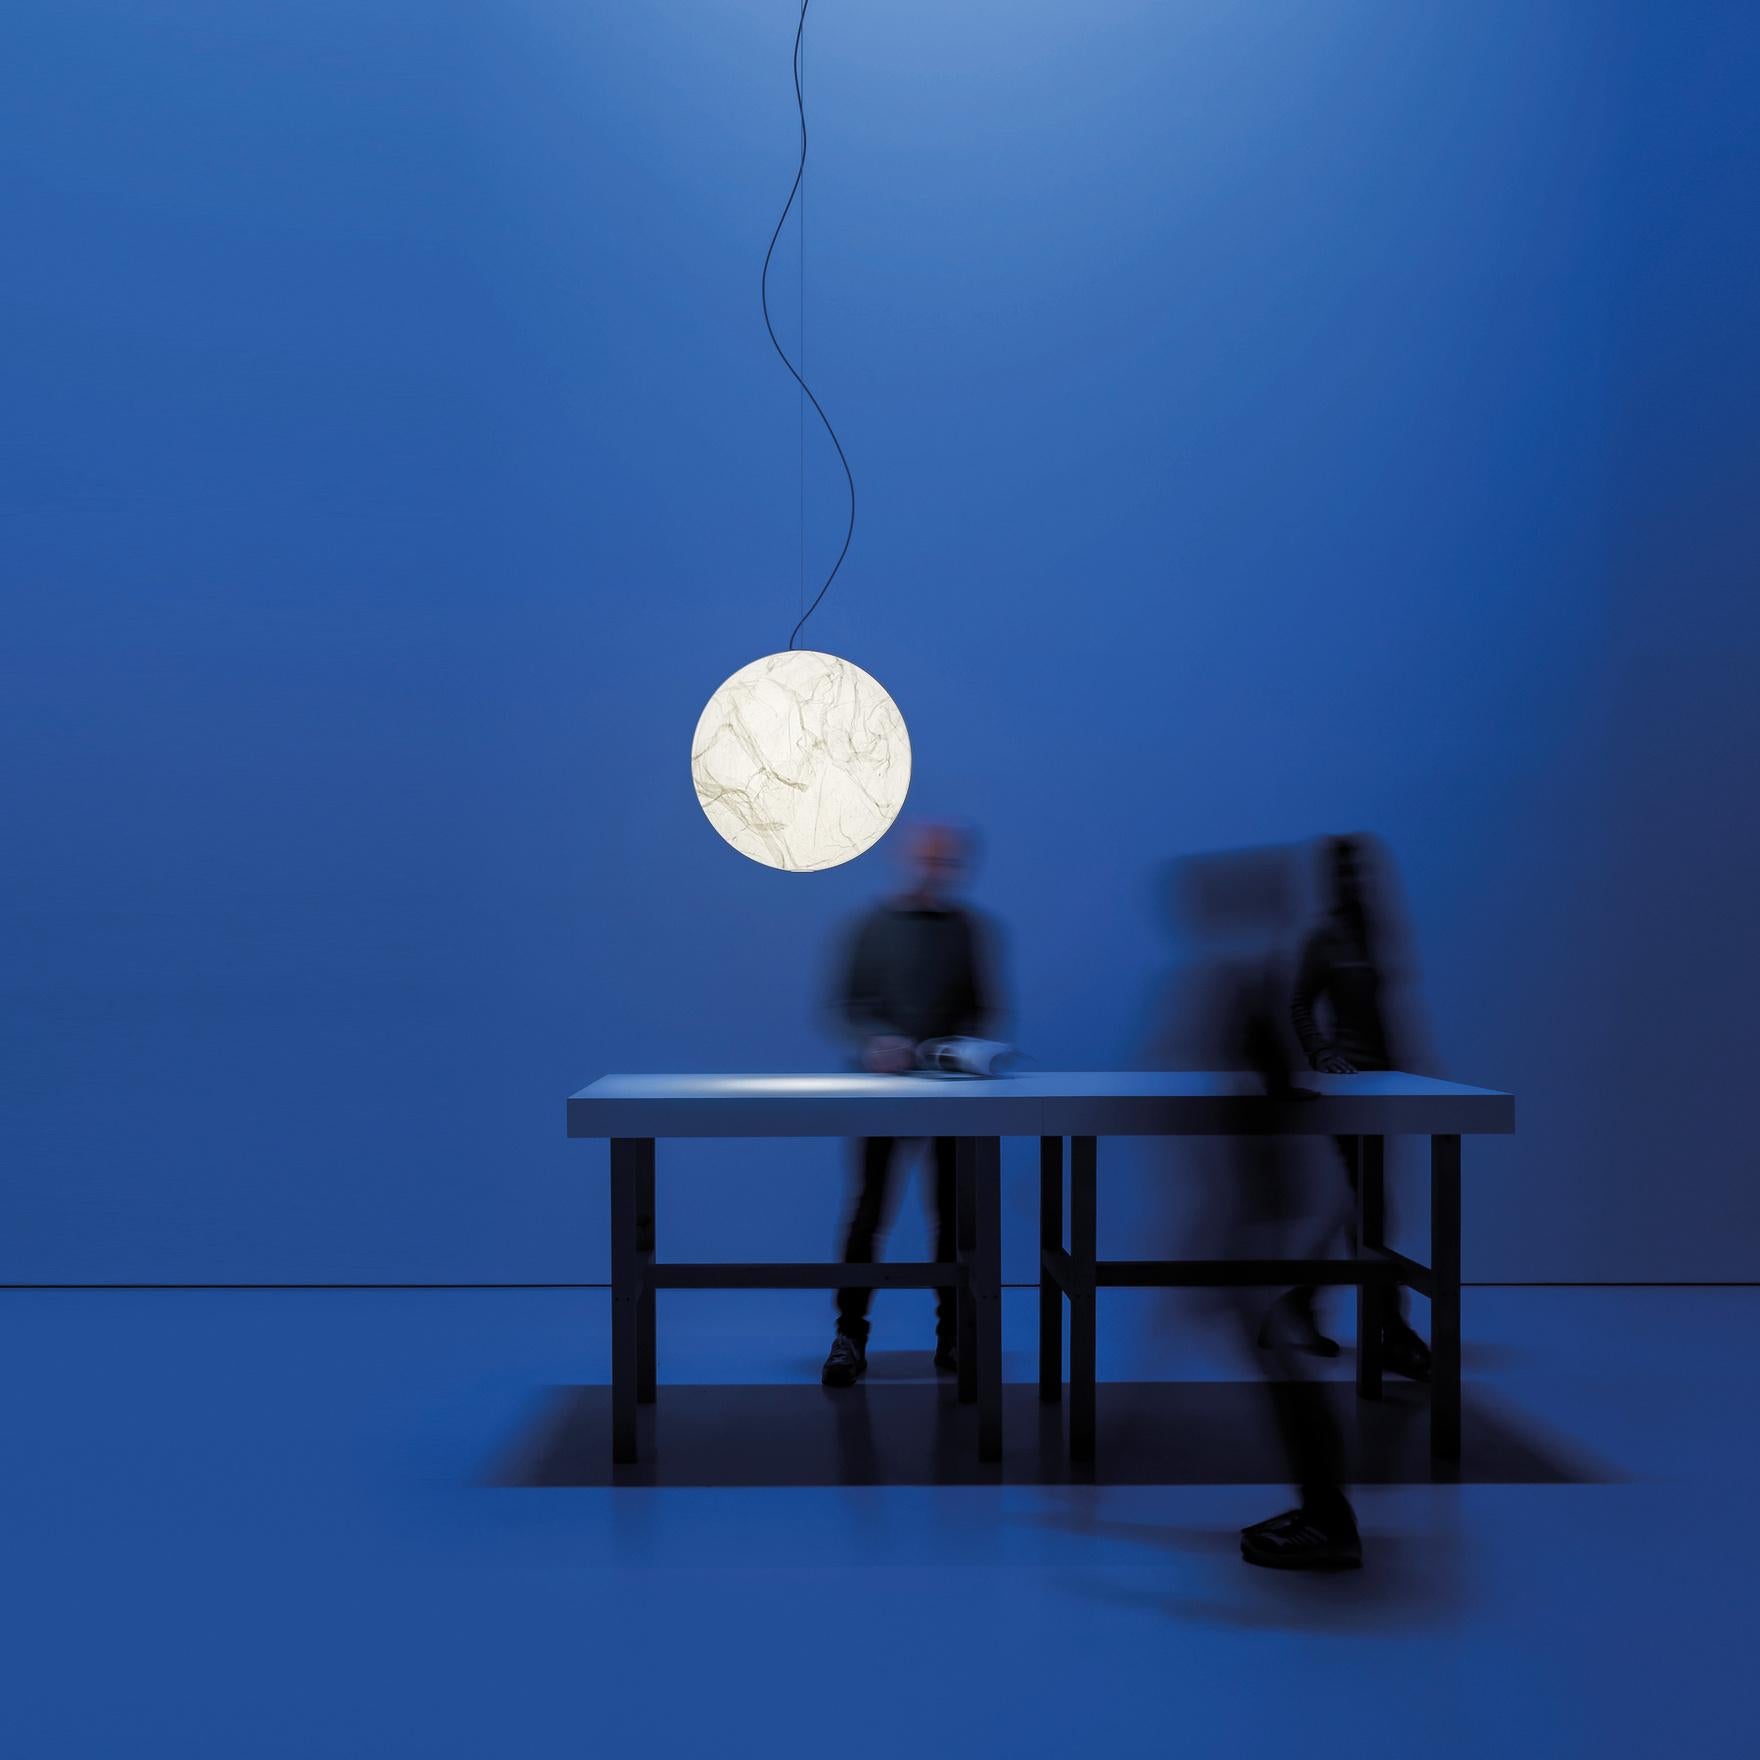 Moon was created from the dream of bringing the moon inside your own home.
The hand-made Japanese paper surface makes every lamp unique. 
Table and floor version available.

Available in different sizes: Small, Extra Large, Large

Diameter